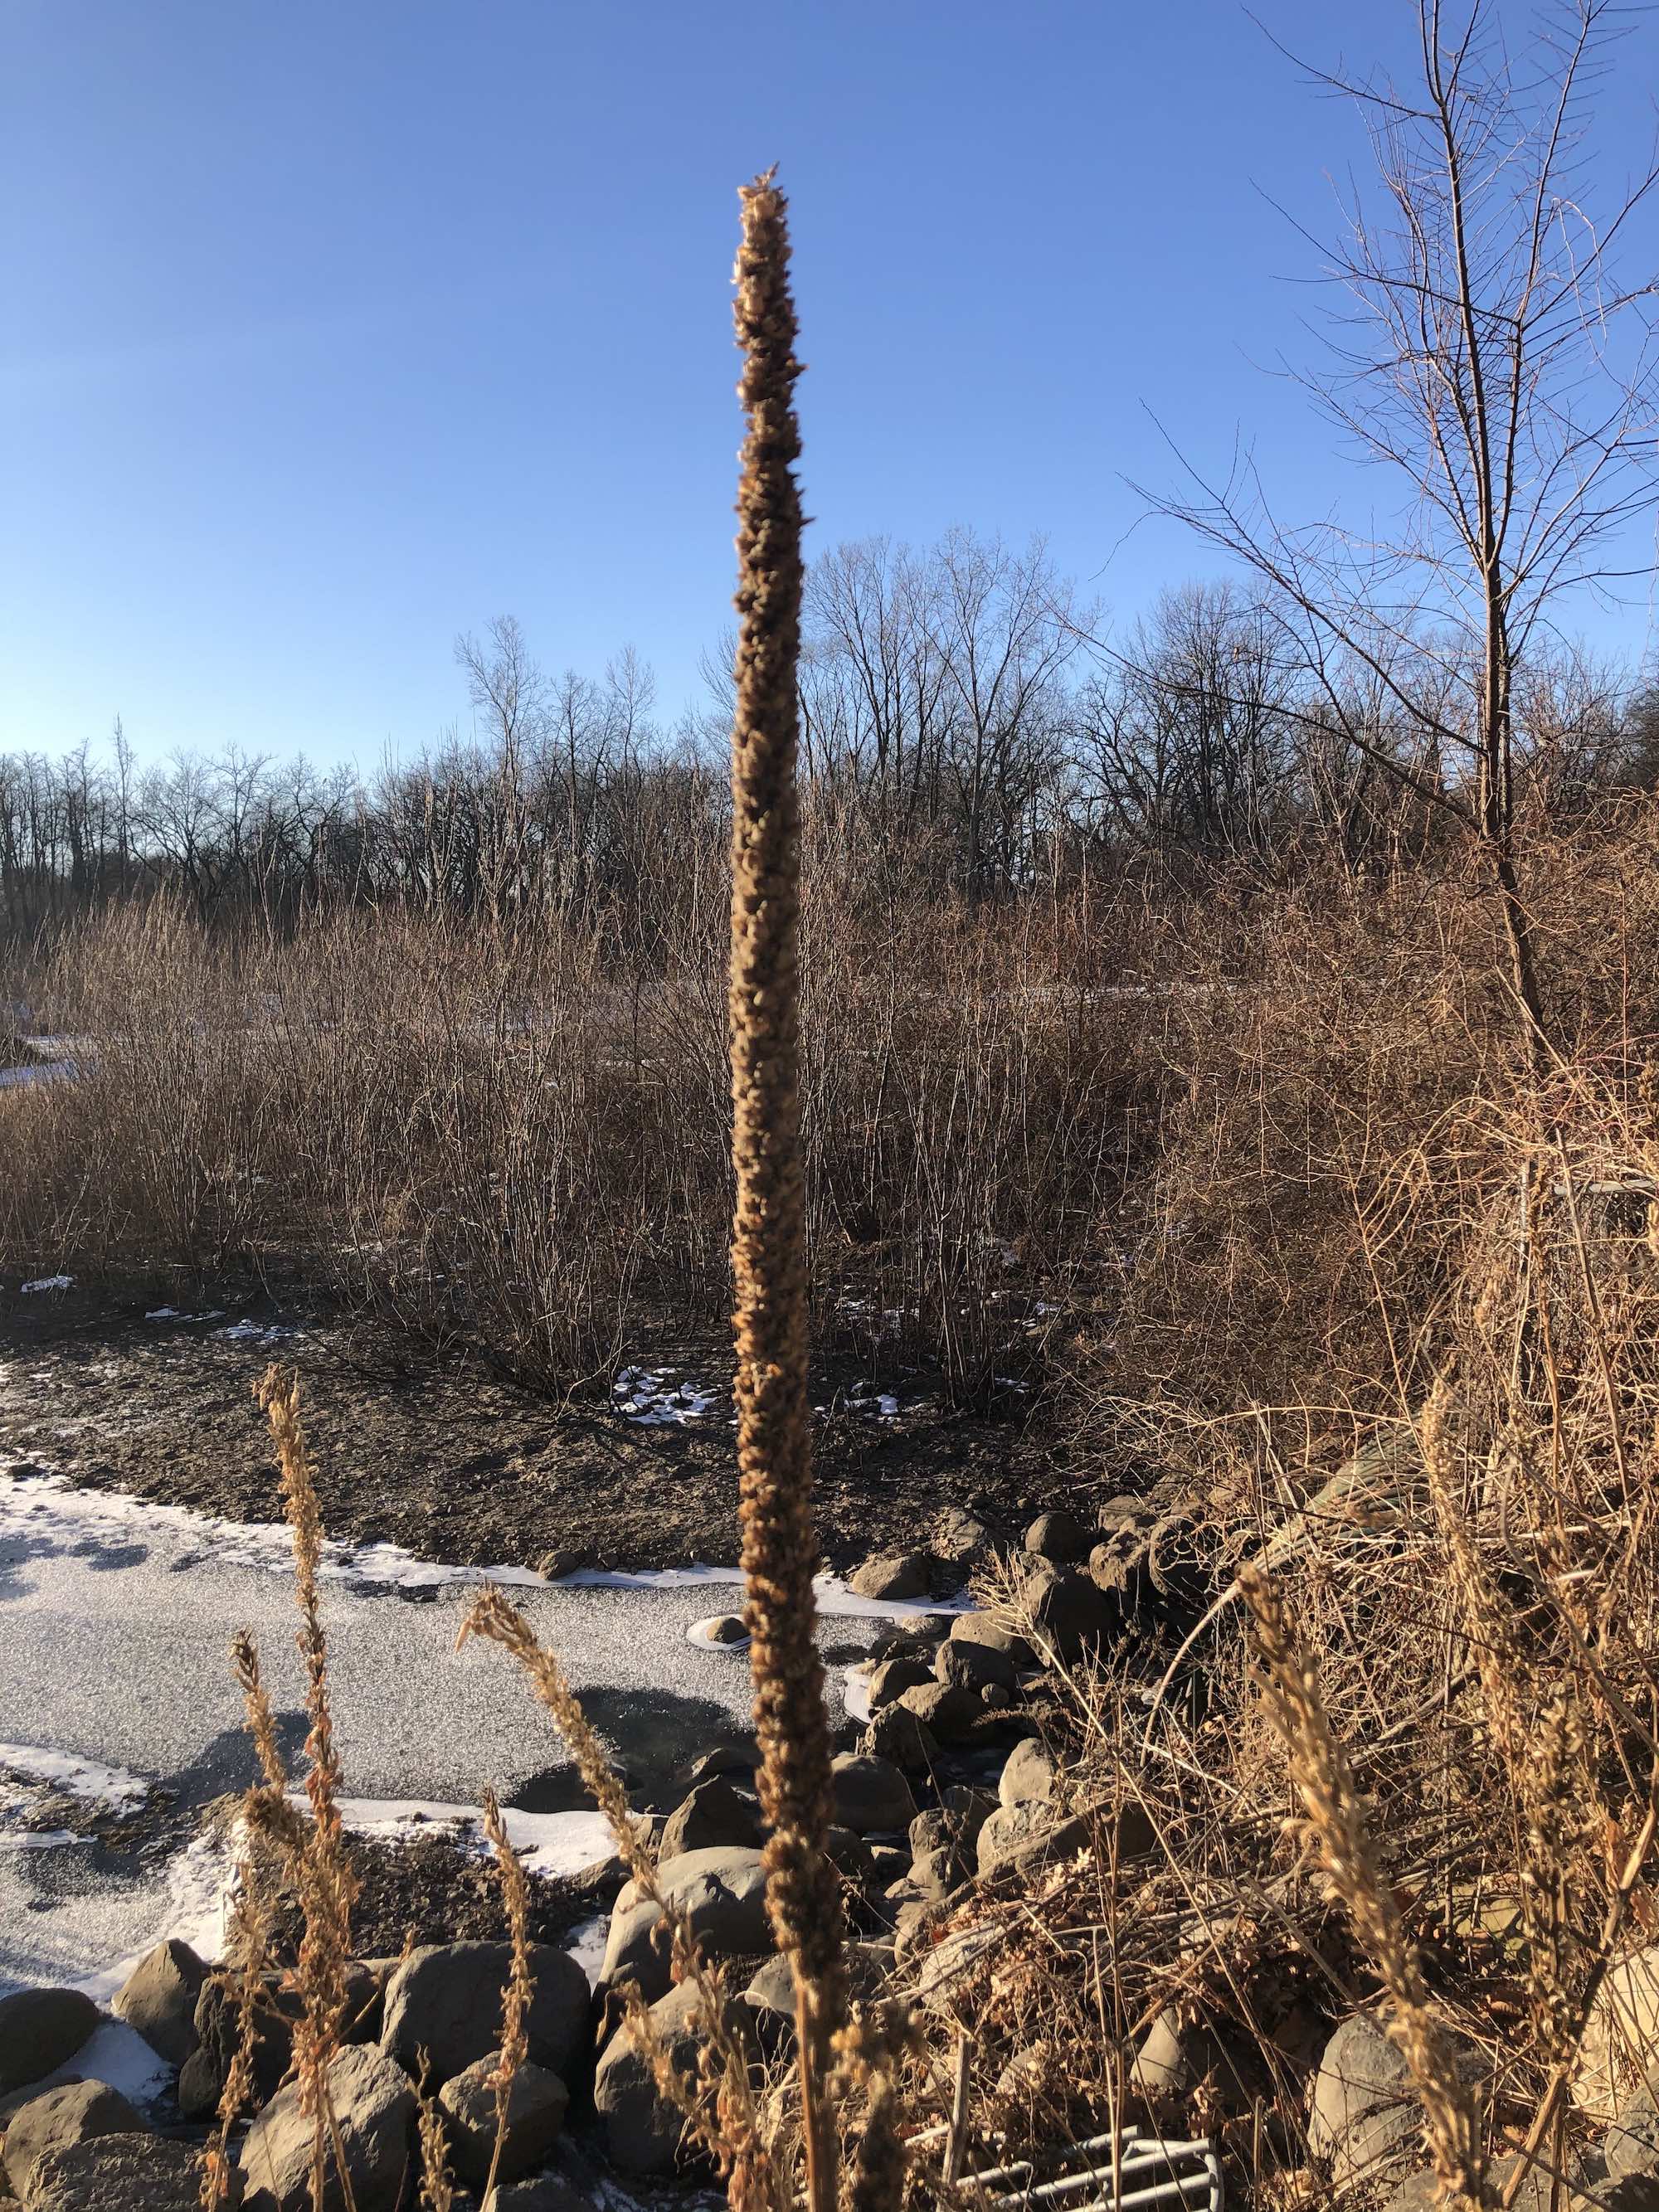 Common Mullein on shore of Marion Dunn Pond on December 26, 2020.